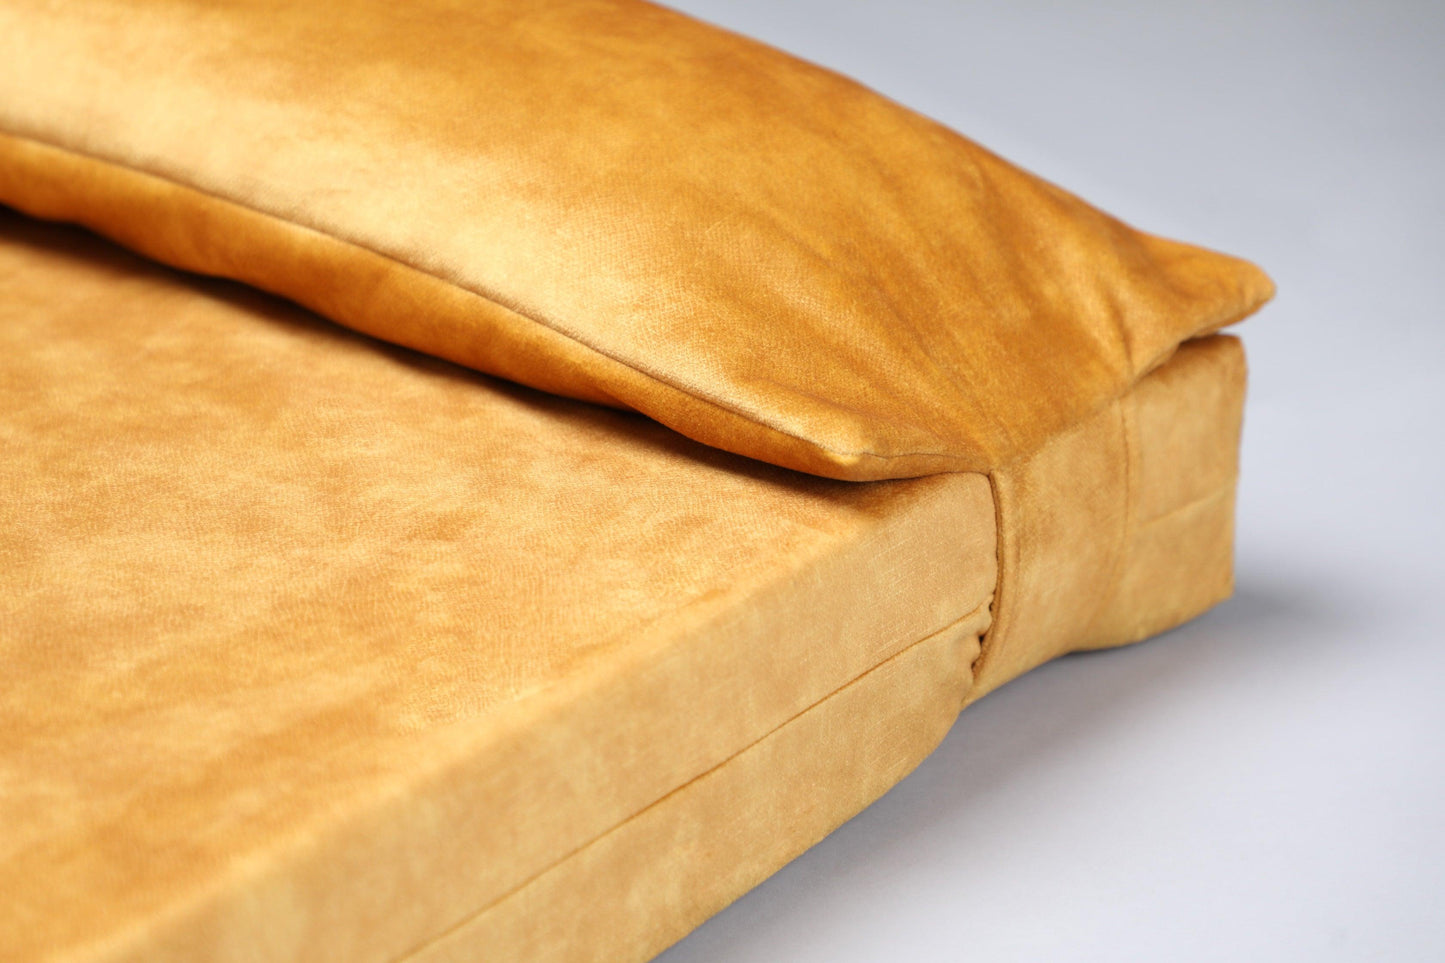 2-sided velvet dog bed. AMBER YELLOW - European handmade dog accessories by My Wild Other